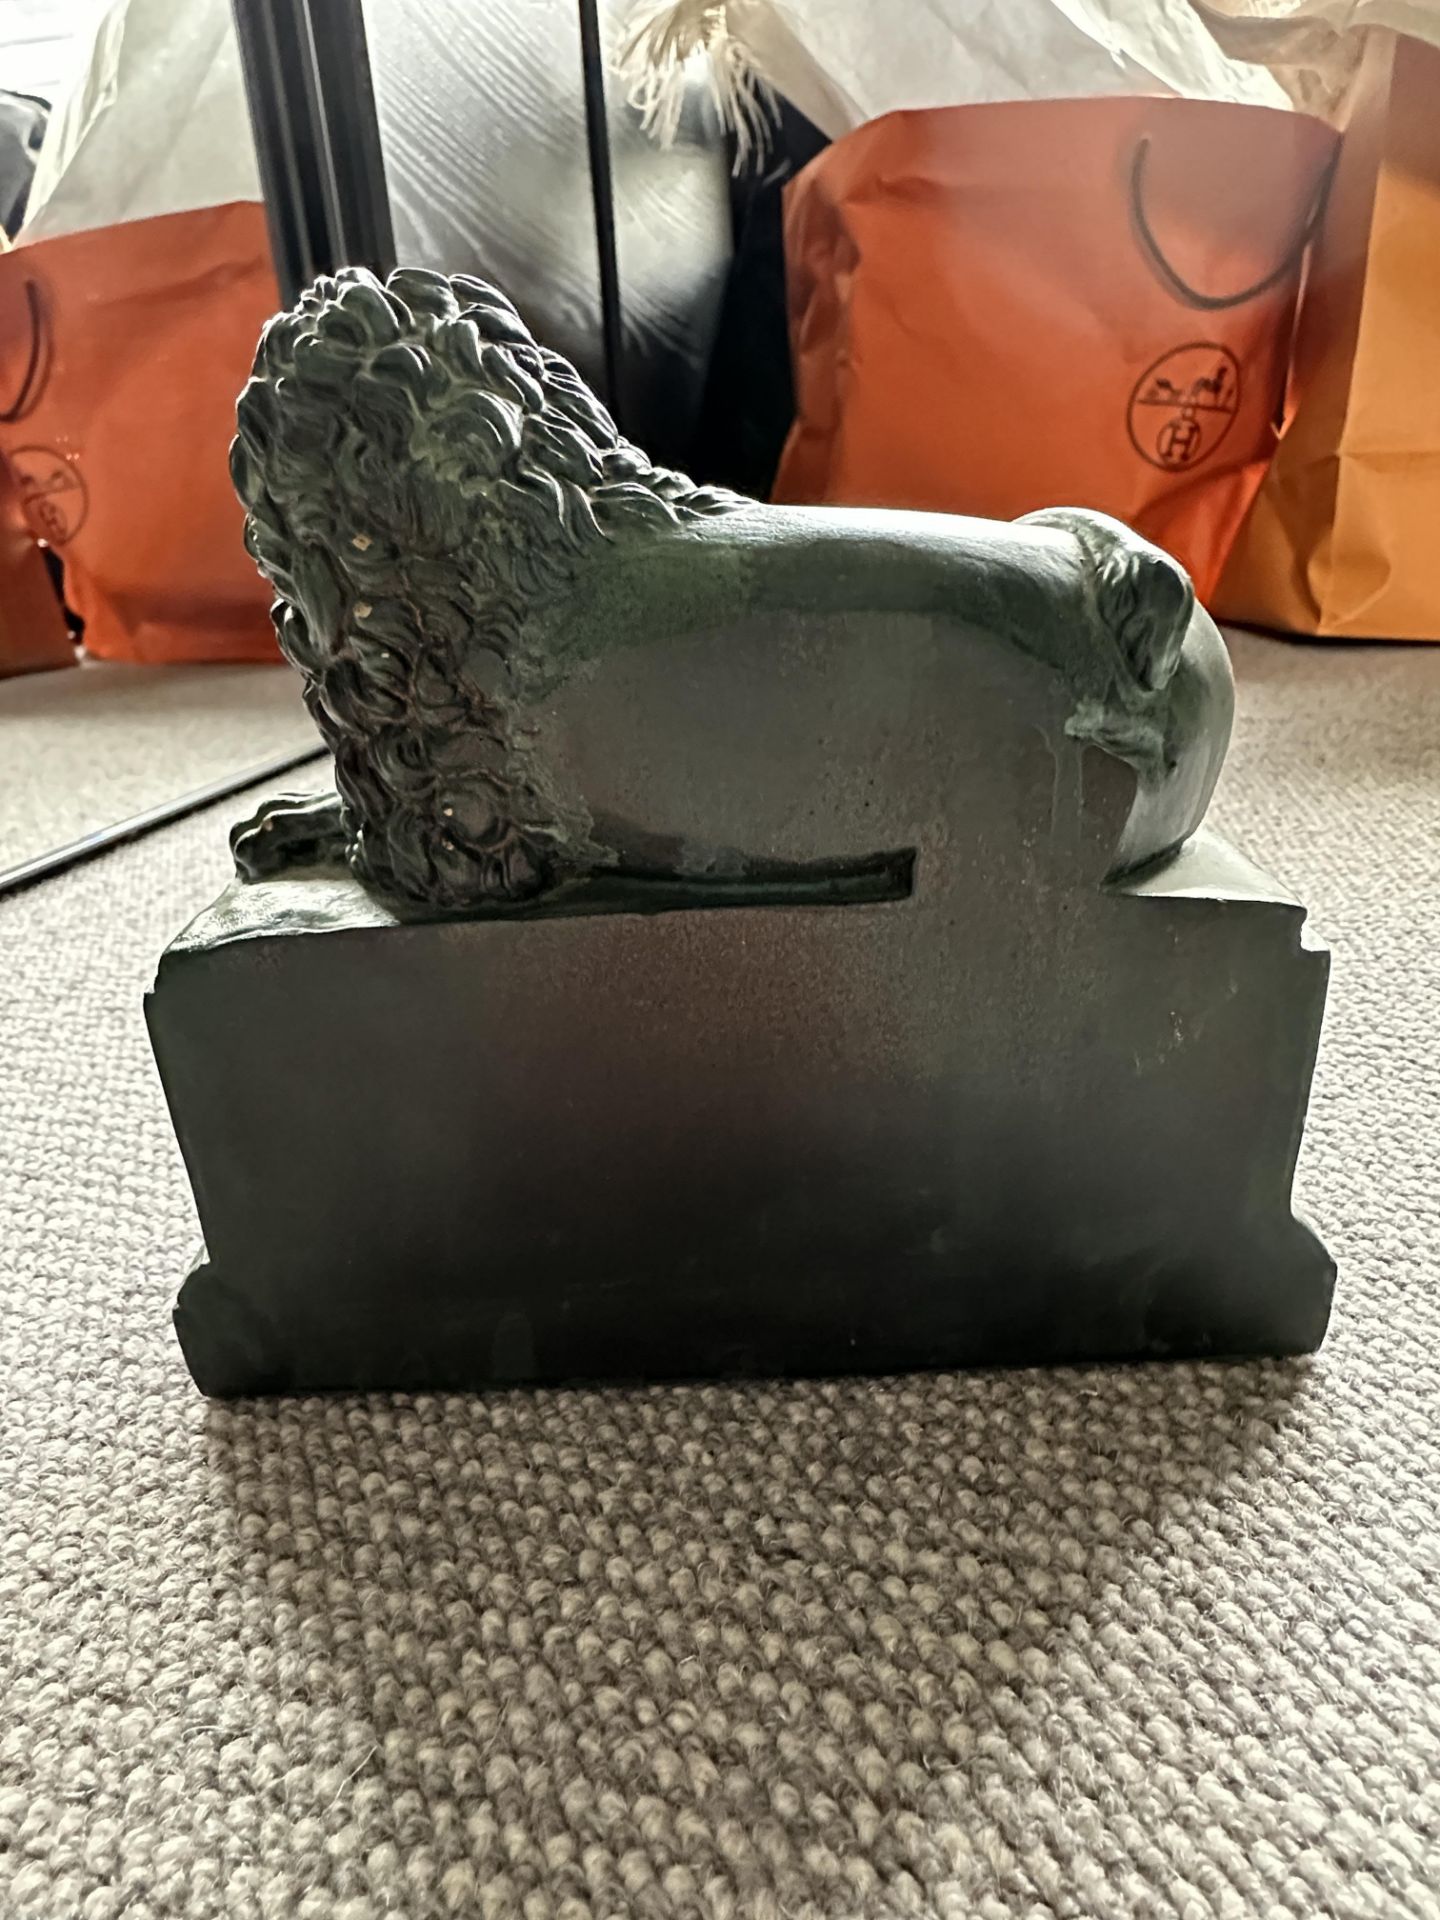 2 x Carved Resin Sleeping Lion Book Ends Bought From An Exclusive Interior Design Boutique - Image 2 of 2